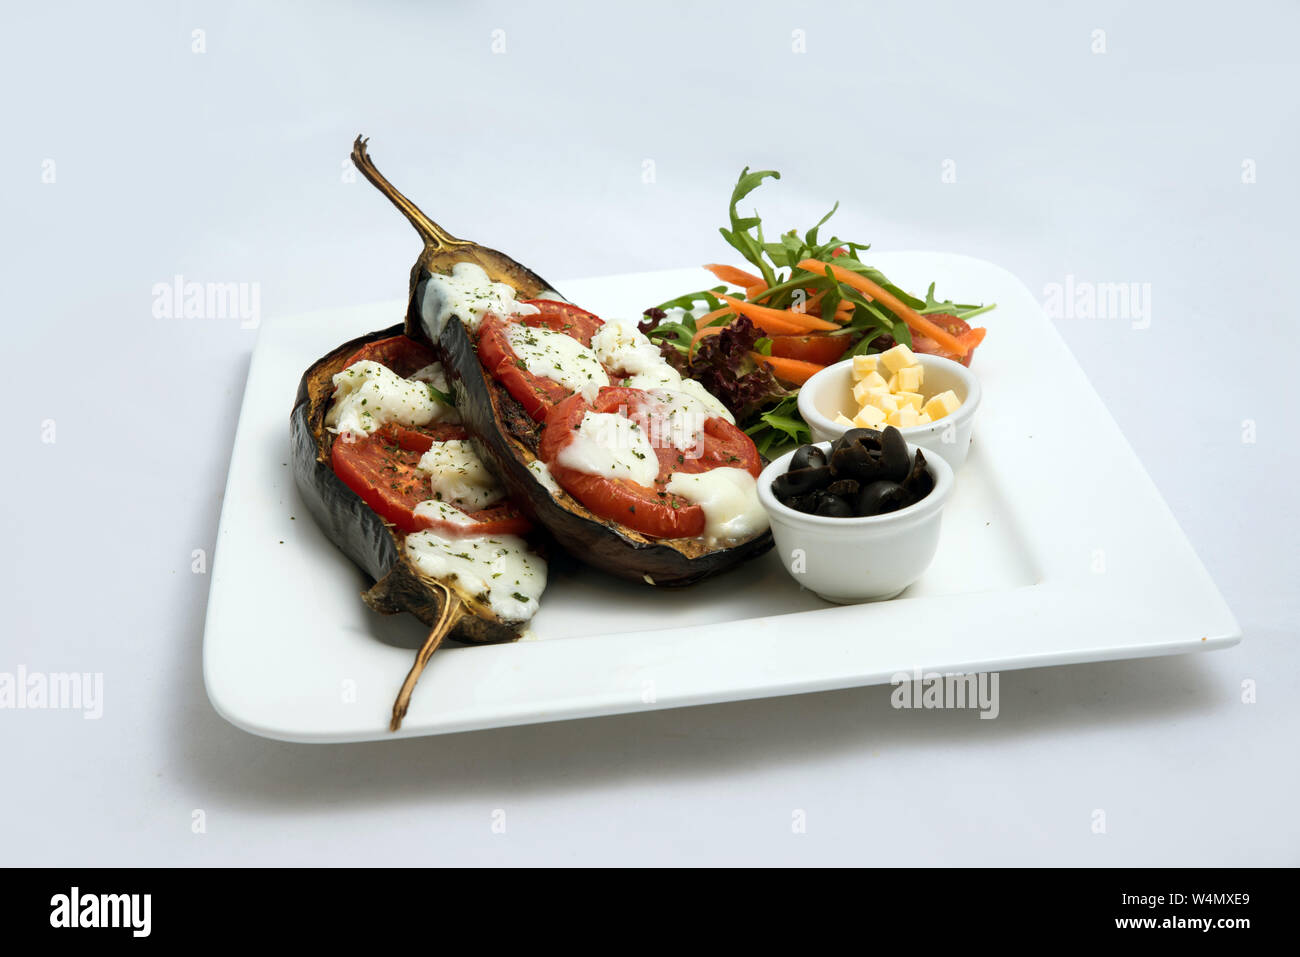 A low contrast warm Hero shot of a main course platter with grilled aubergine with buffalo cheese, tomato, olives & vegetables on the side, on a minim Stock Photo